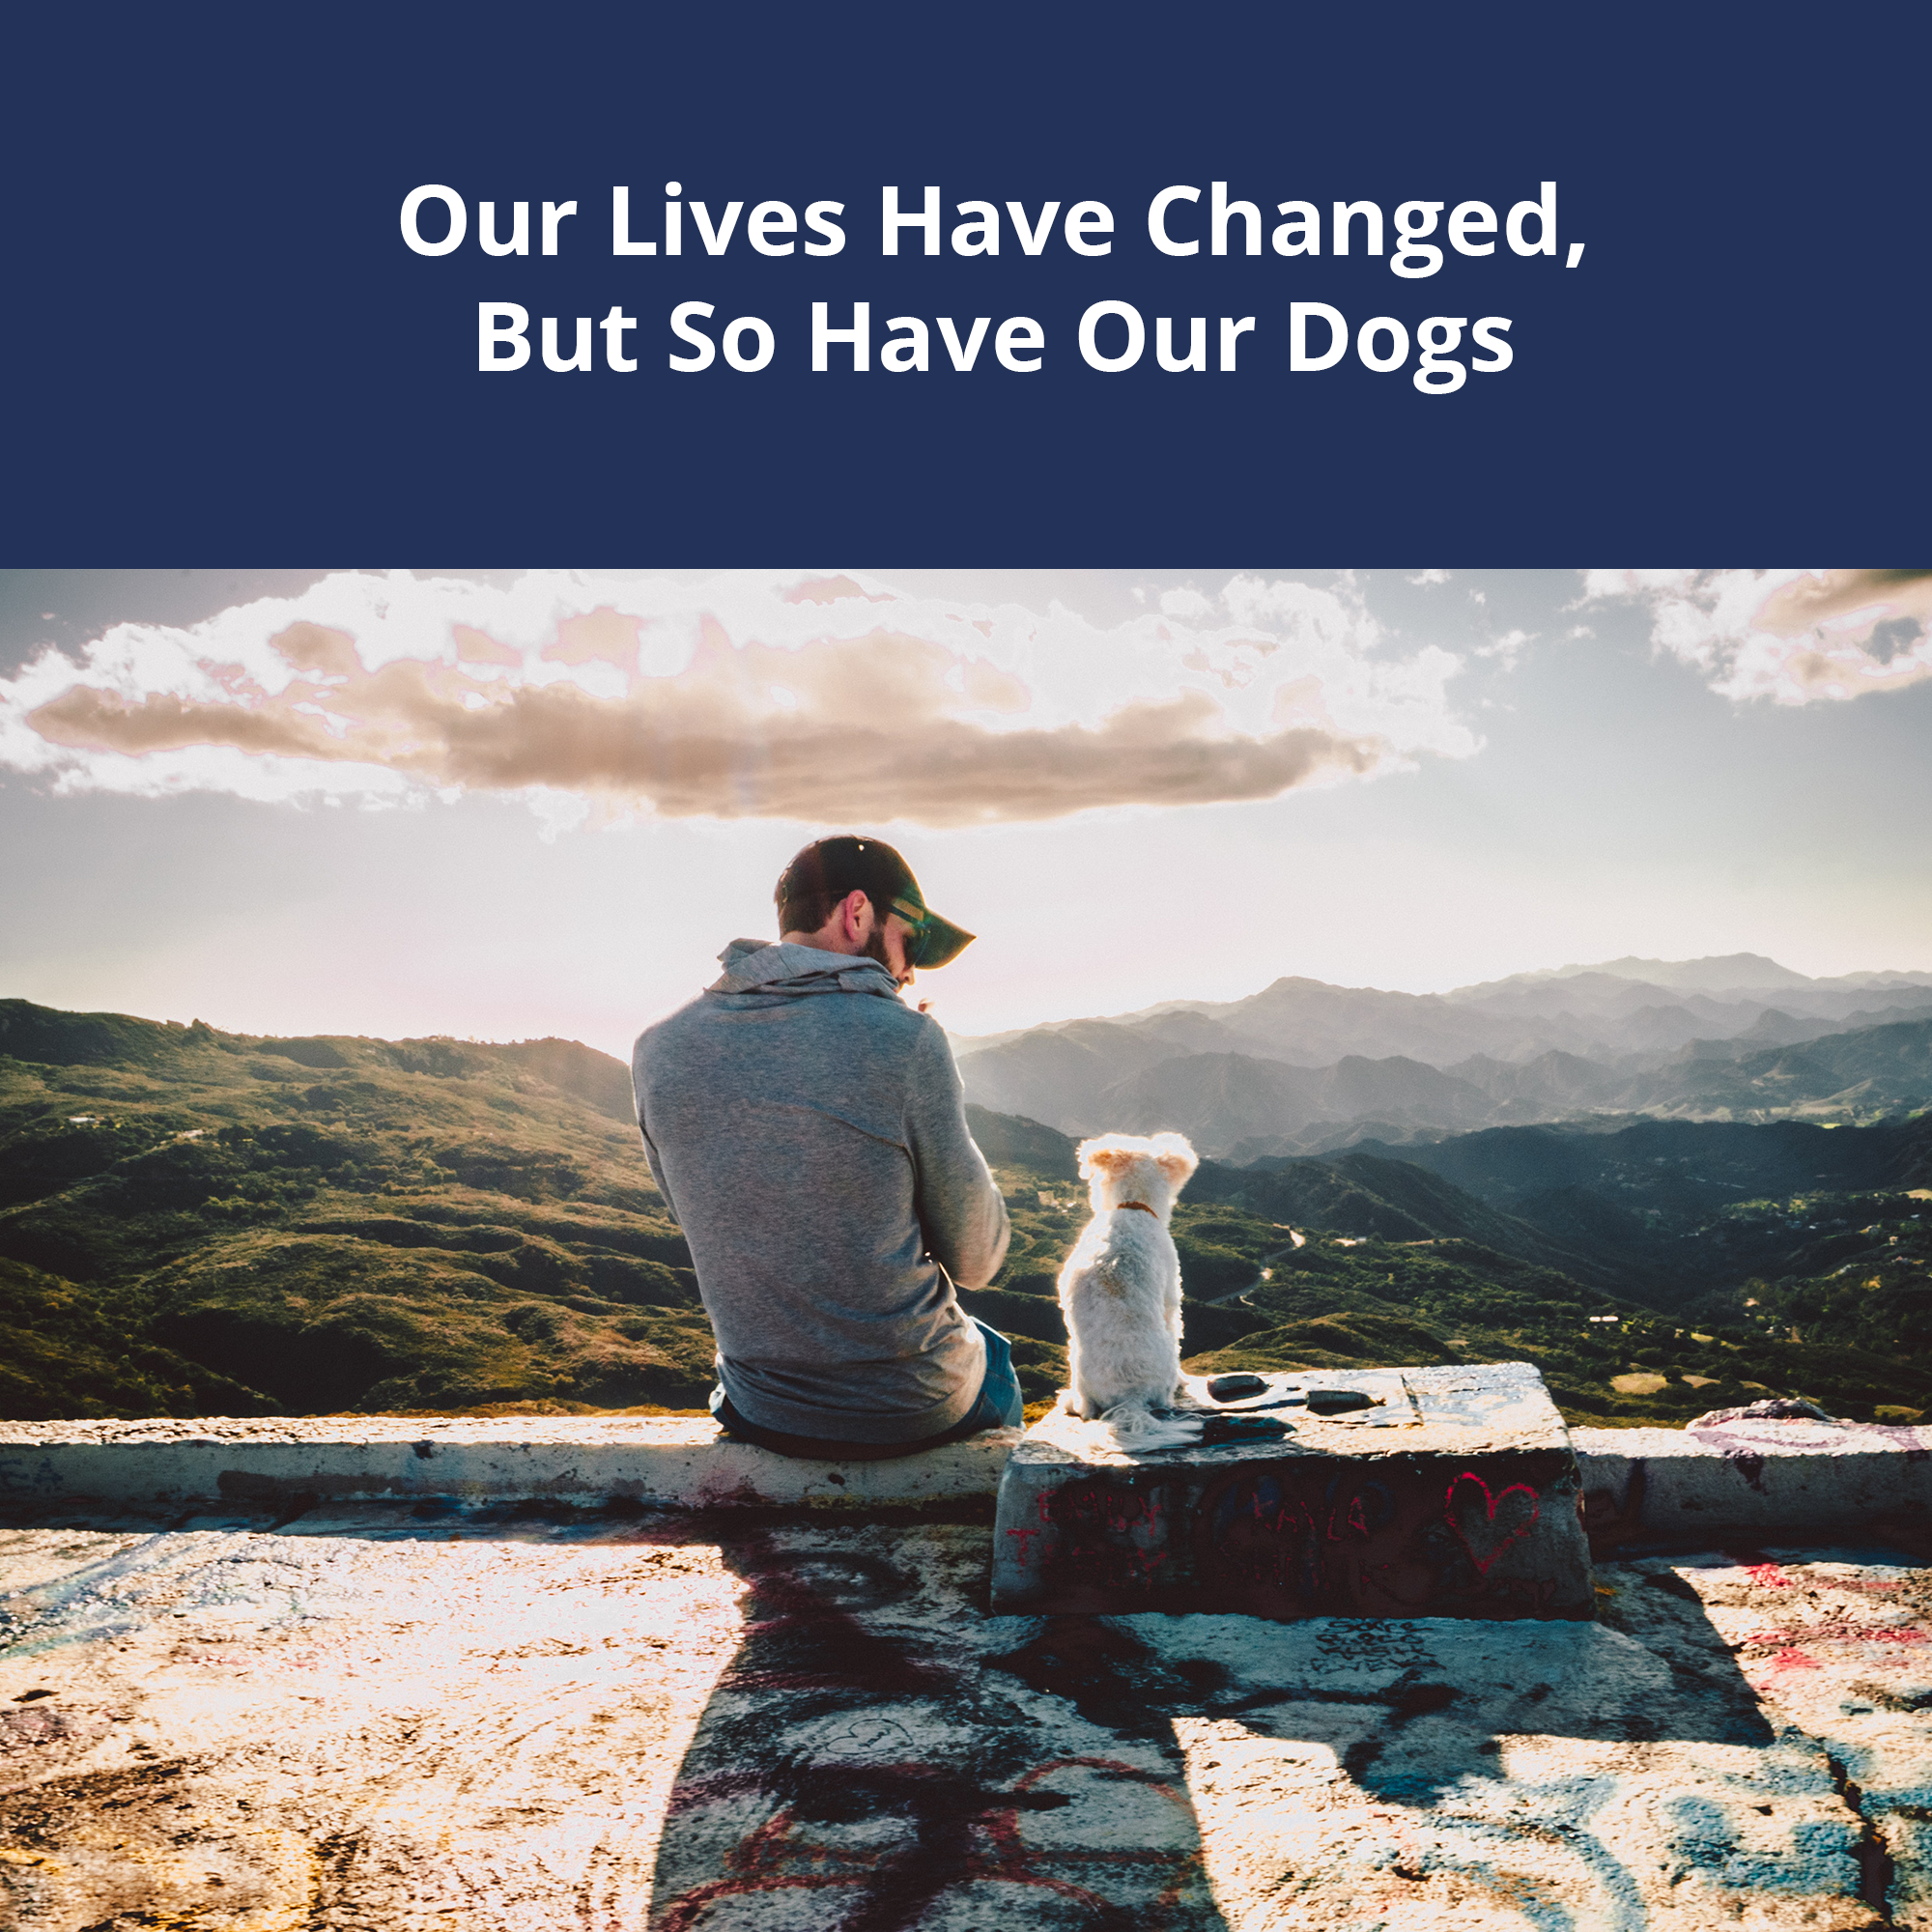 Our Lives Have Changed, But So Have Our Dogs